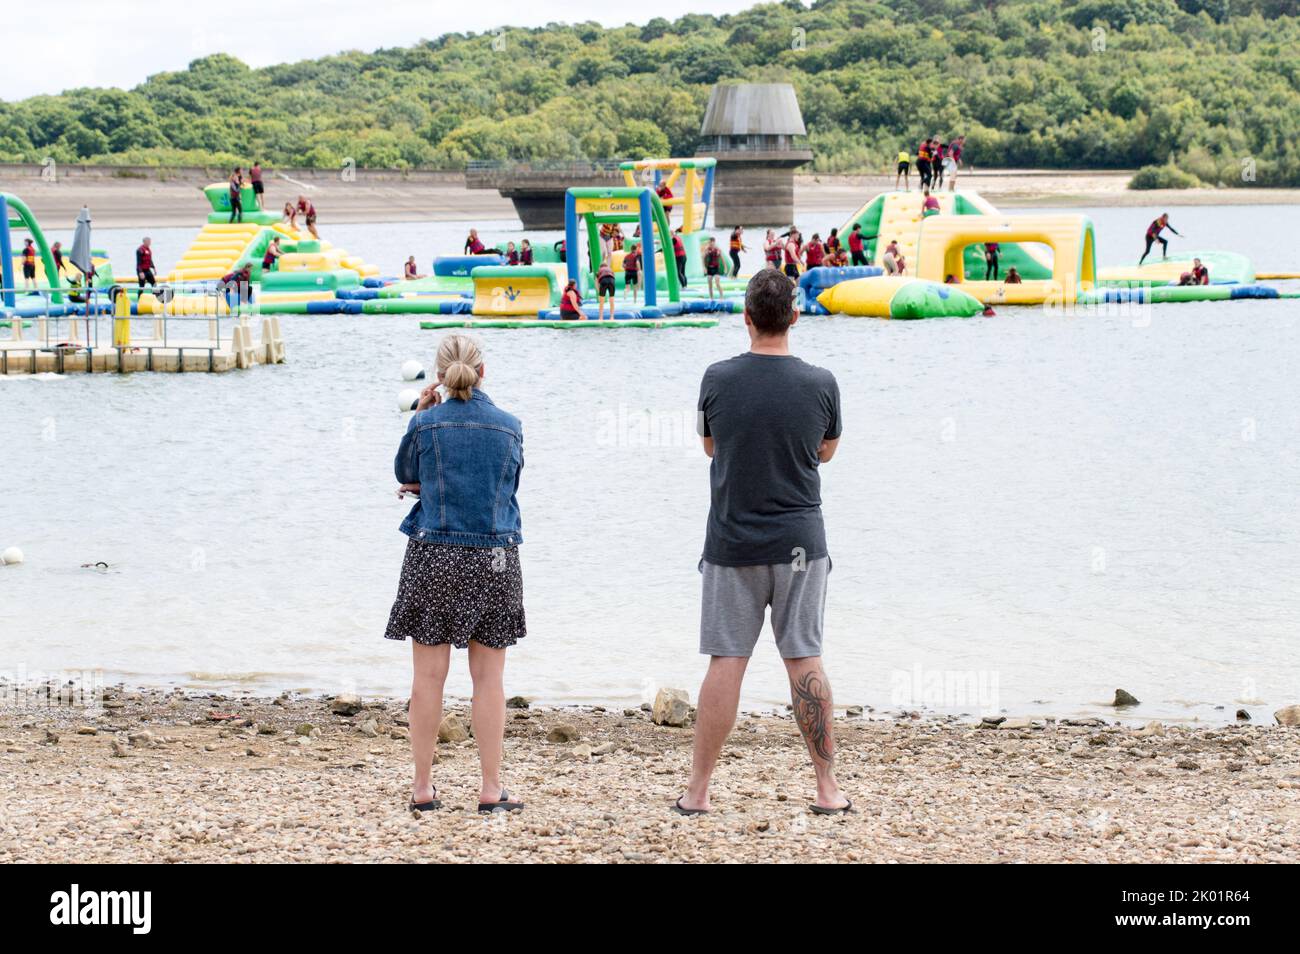 Spectators watching the Aqua park from the shore at Bewl water Stock Photo